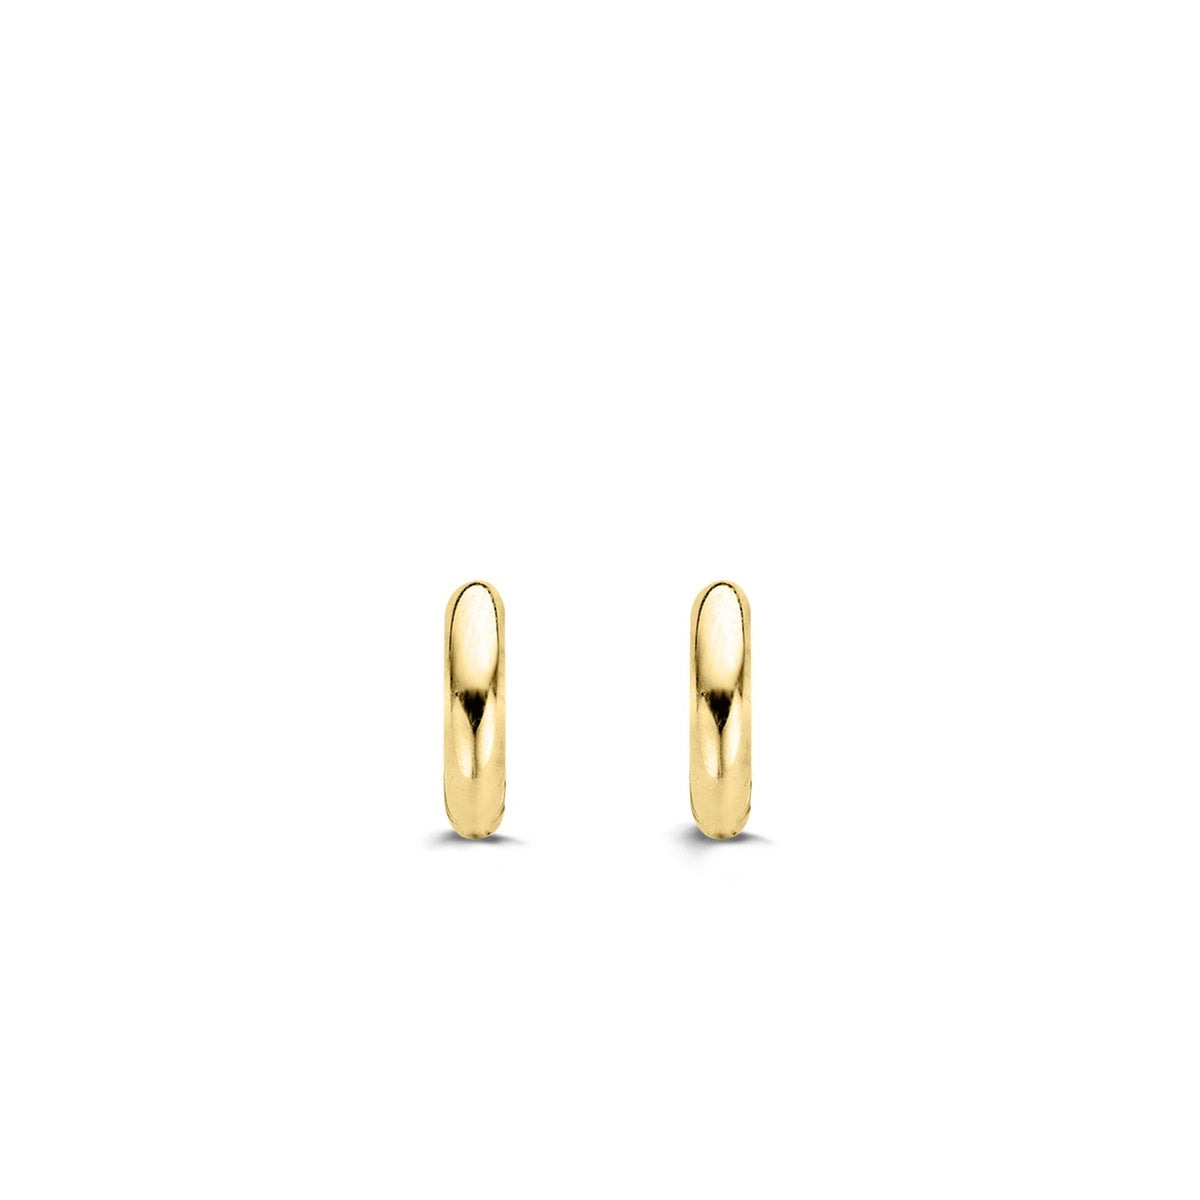 TI SENTO Sterling Silver and Gold Tone Huggie Earrings